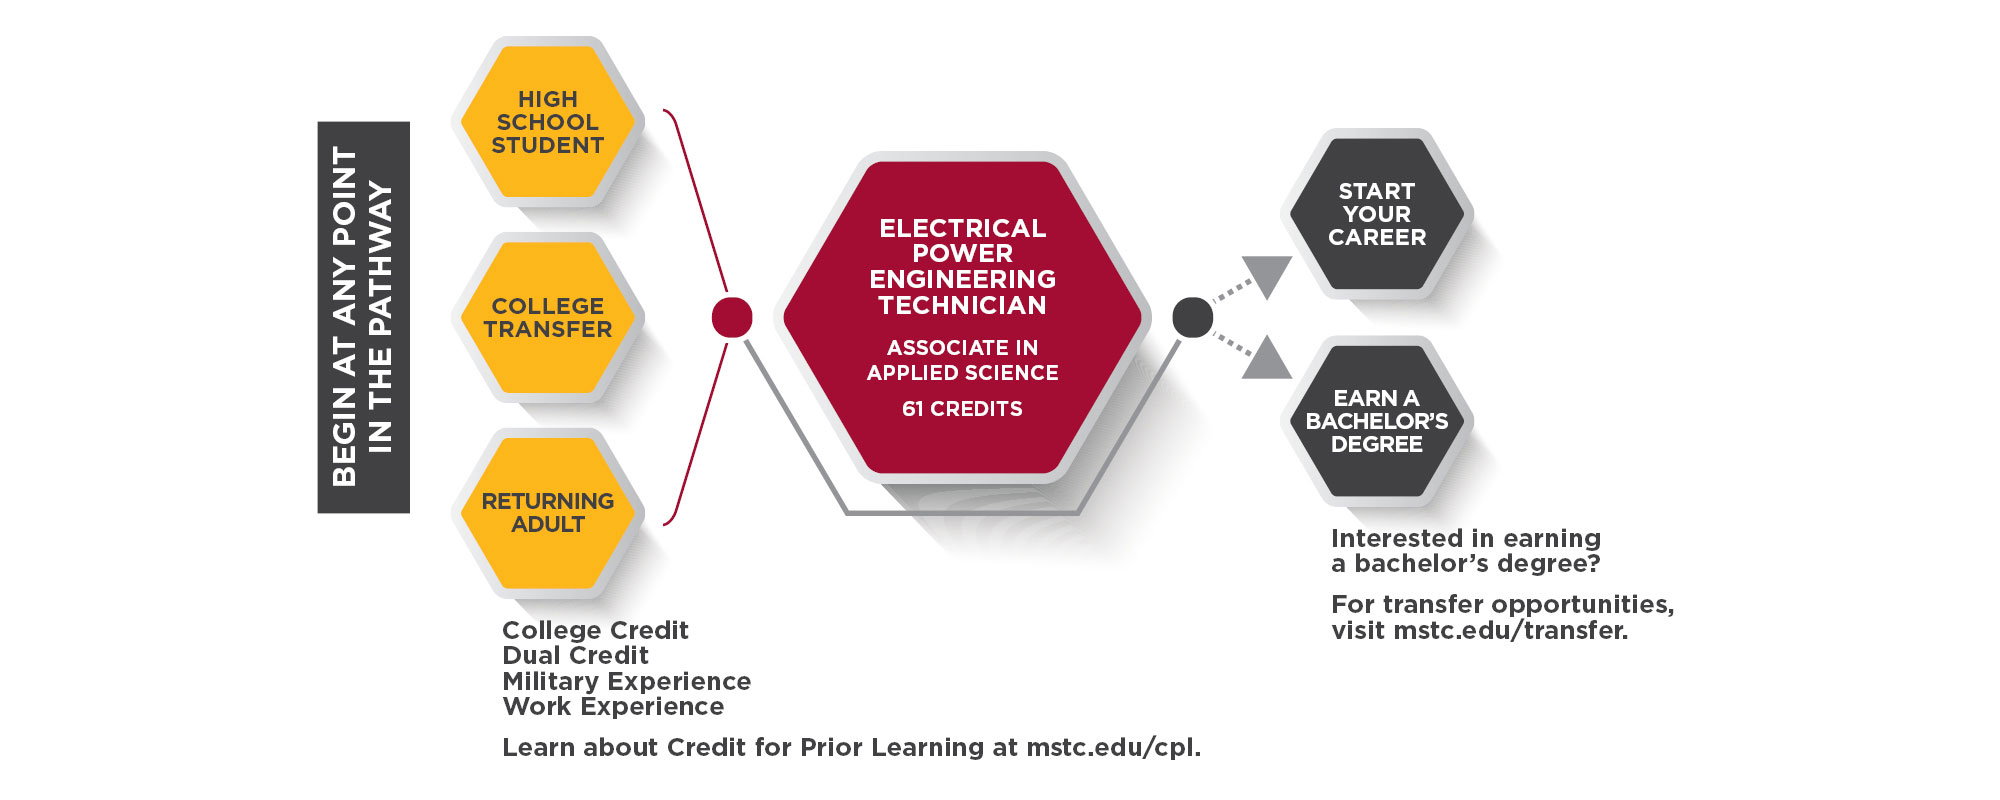 Electrical Power Engineering Technician Pathway Graphic